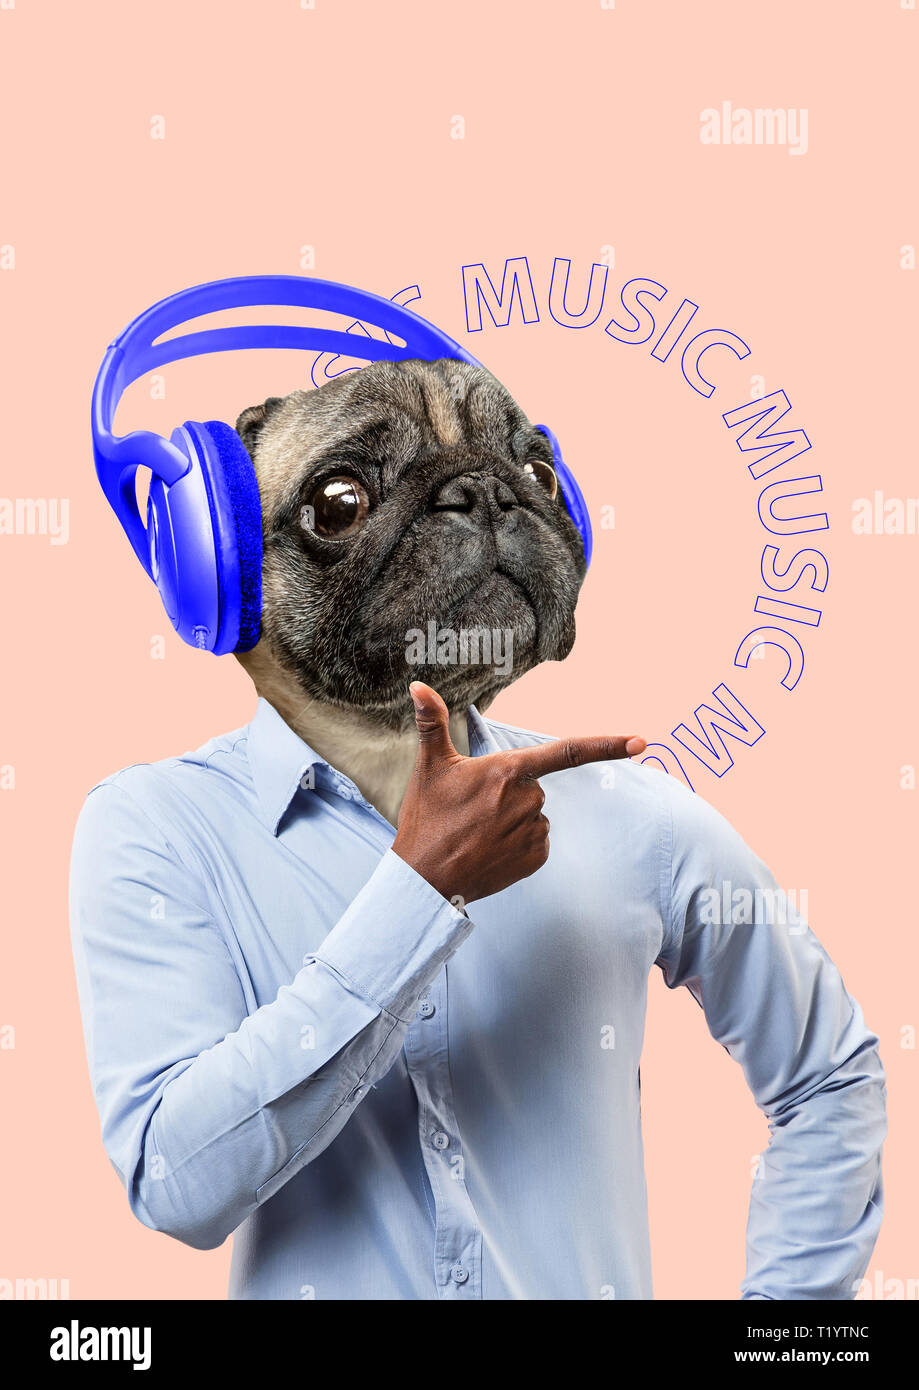 Meloman may be different. Music is available for everyone. Alternative view of pets. Man in shirt headed by dogs or pugs head with big blue headphones. Modern design. Contemporary art collage. Stock Photo